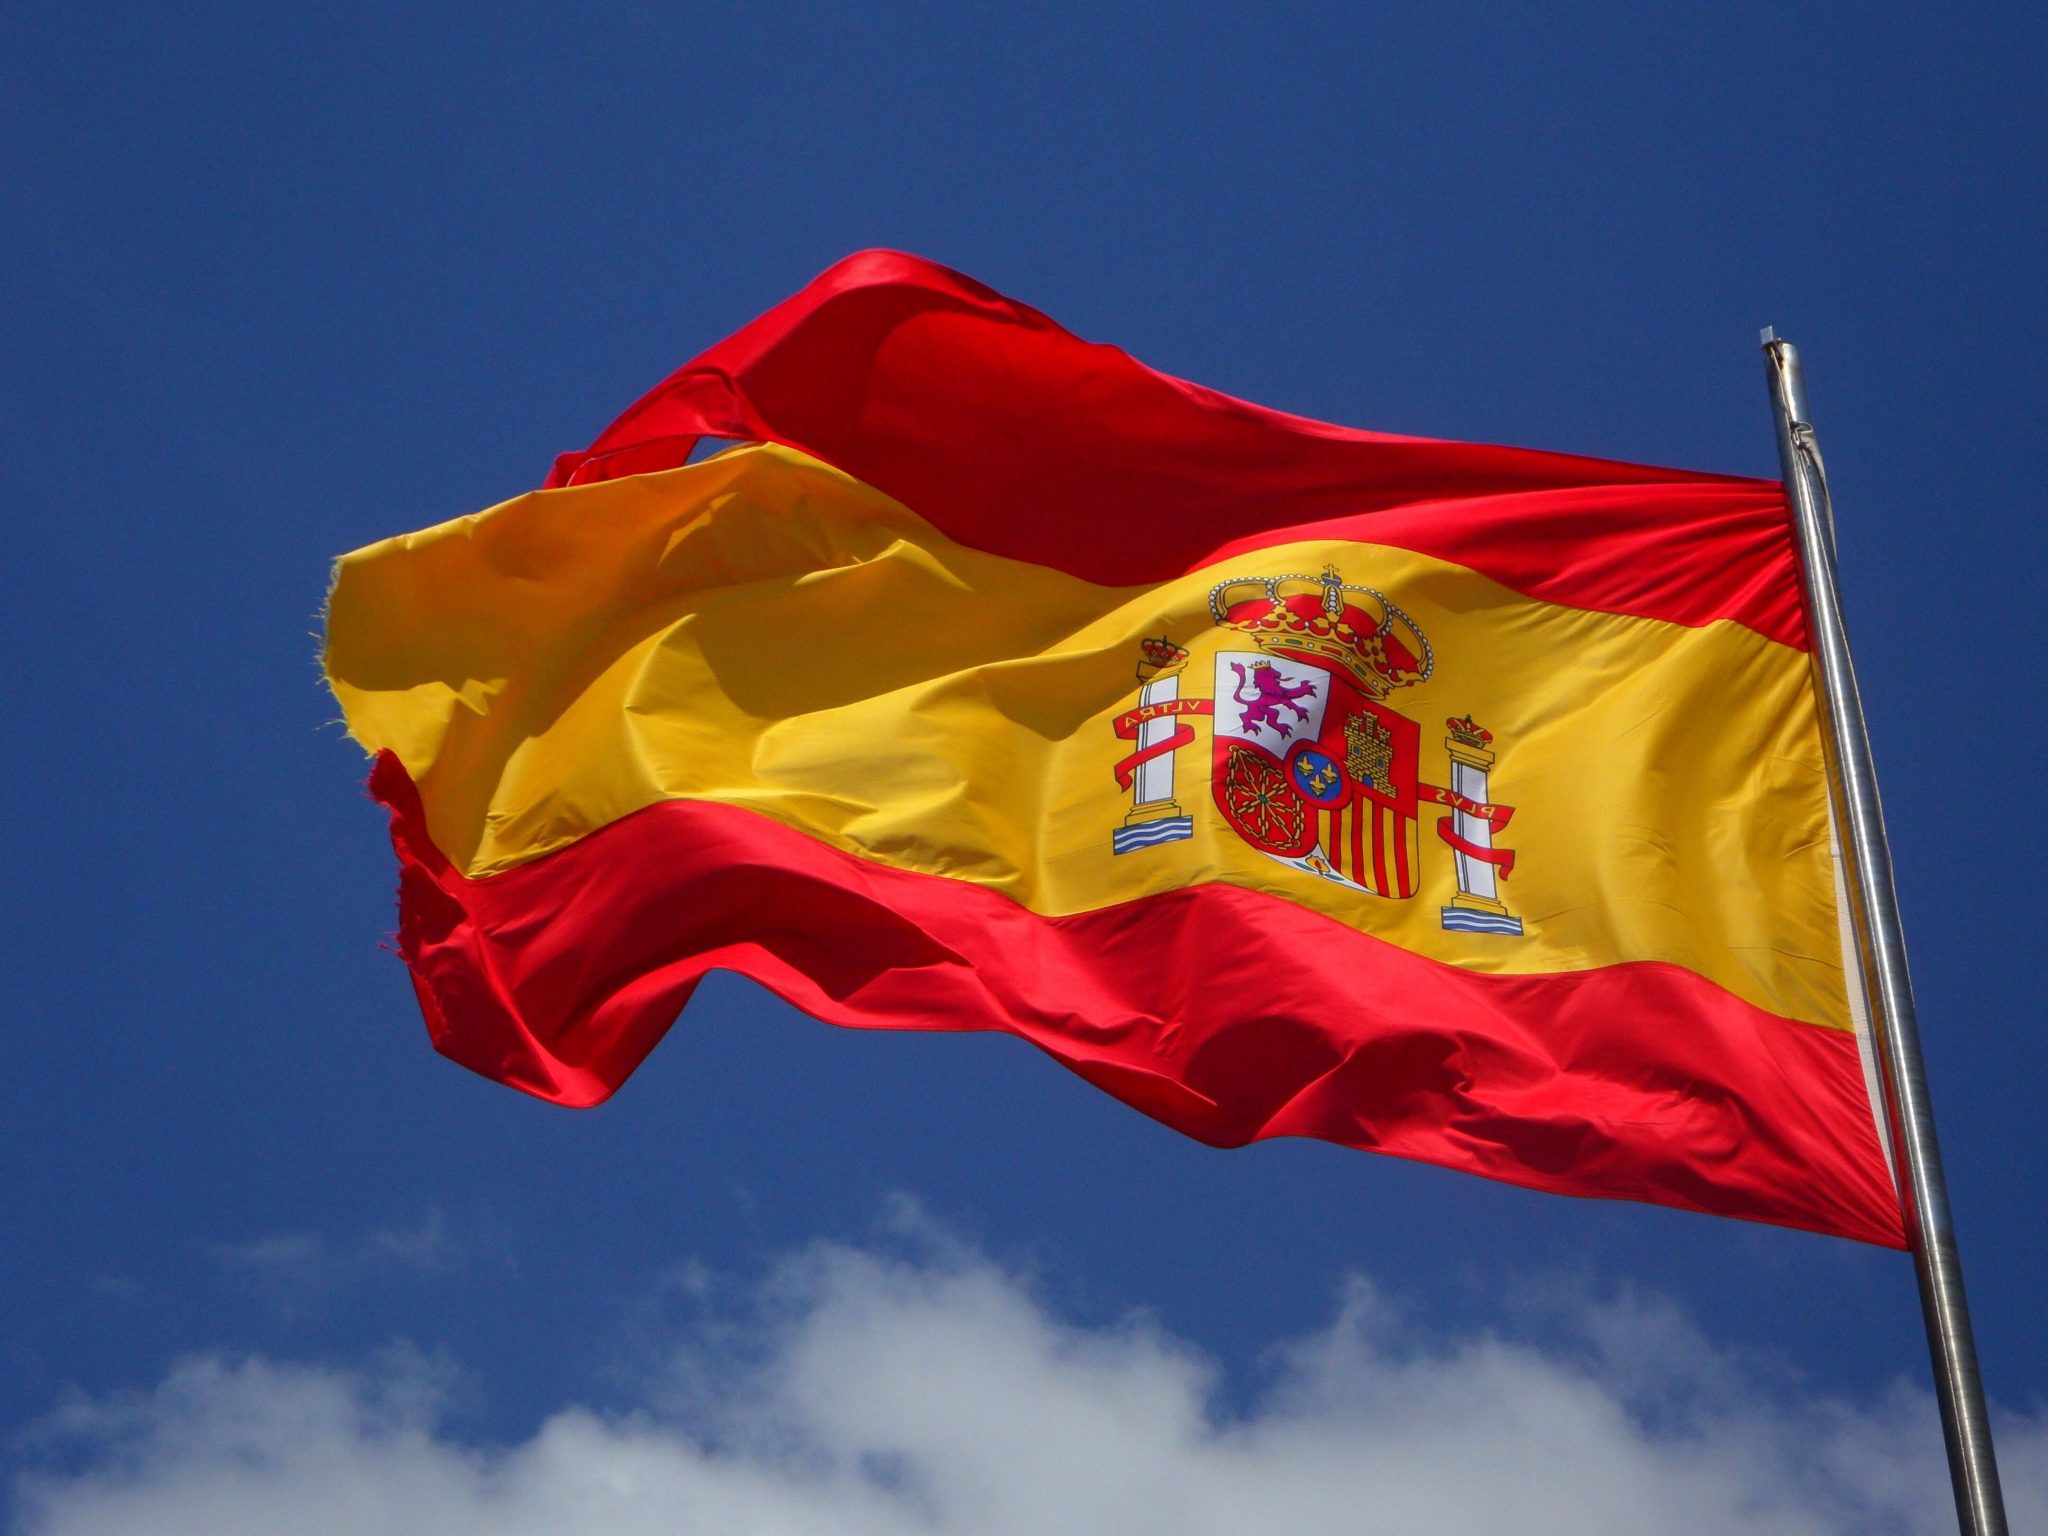 Spain's Casual Hoteles Hotels To Accept Bitcoins - Cryptimi